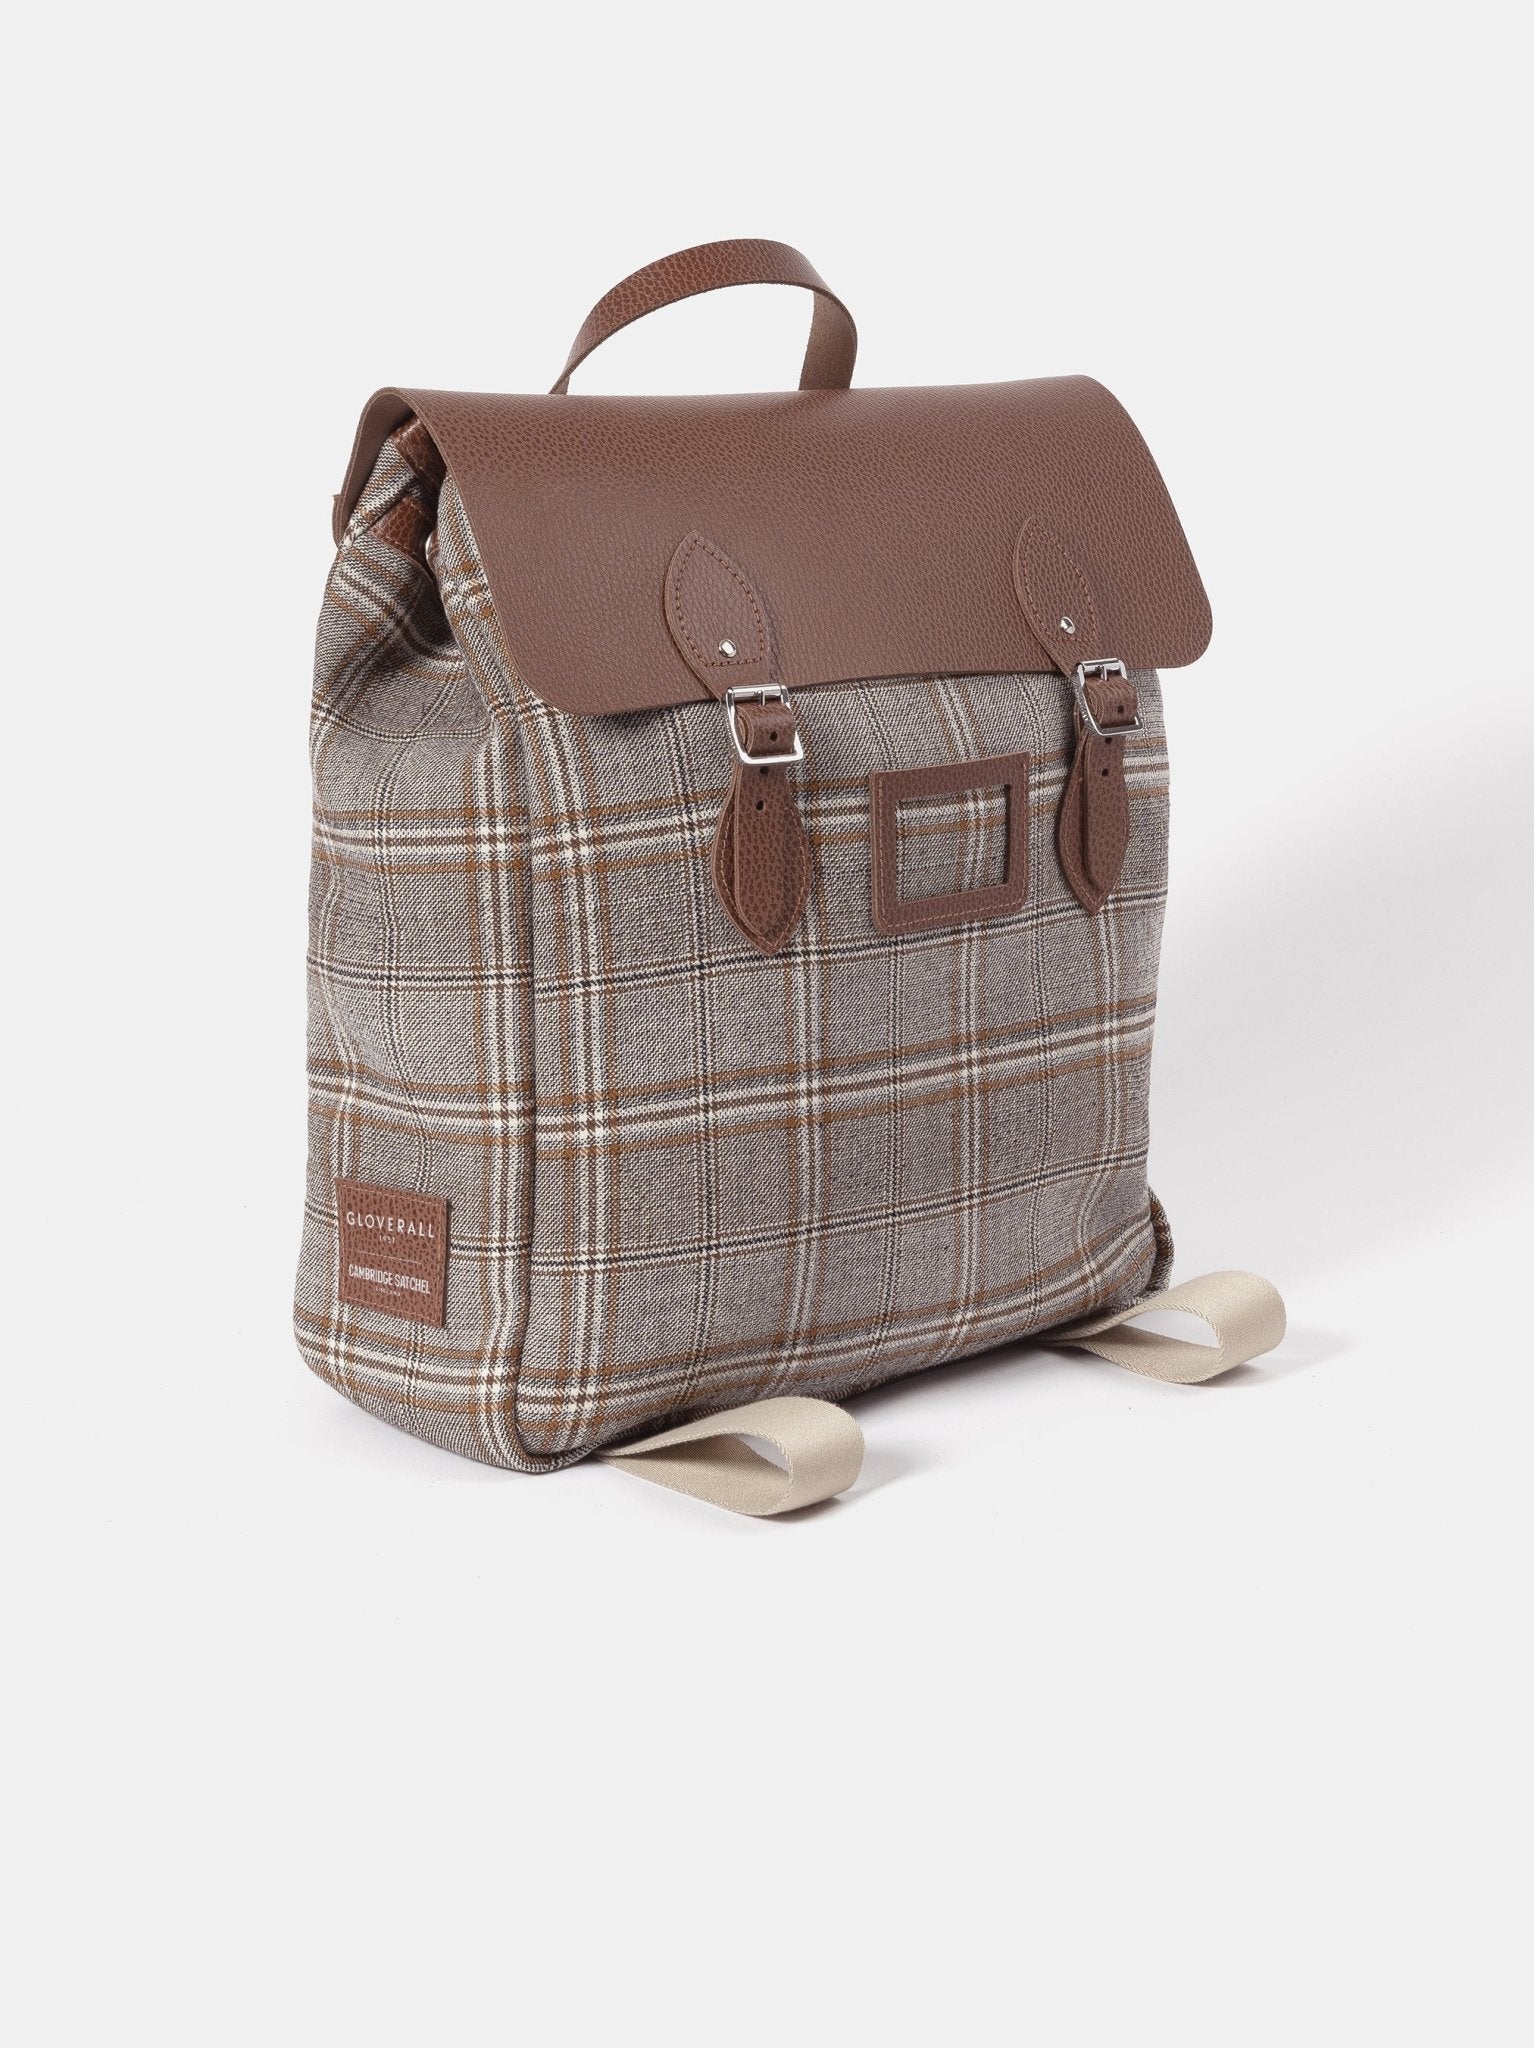 The Steamer Backpack - Bay Celtic Grain & Gloverall Grey Check - The Cambridge Satchel Co.